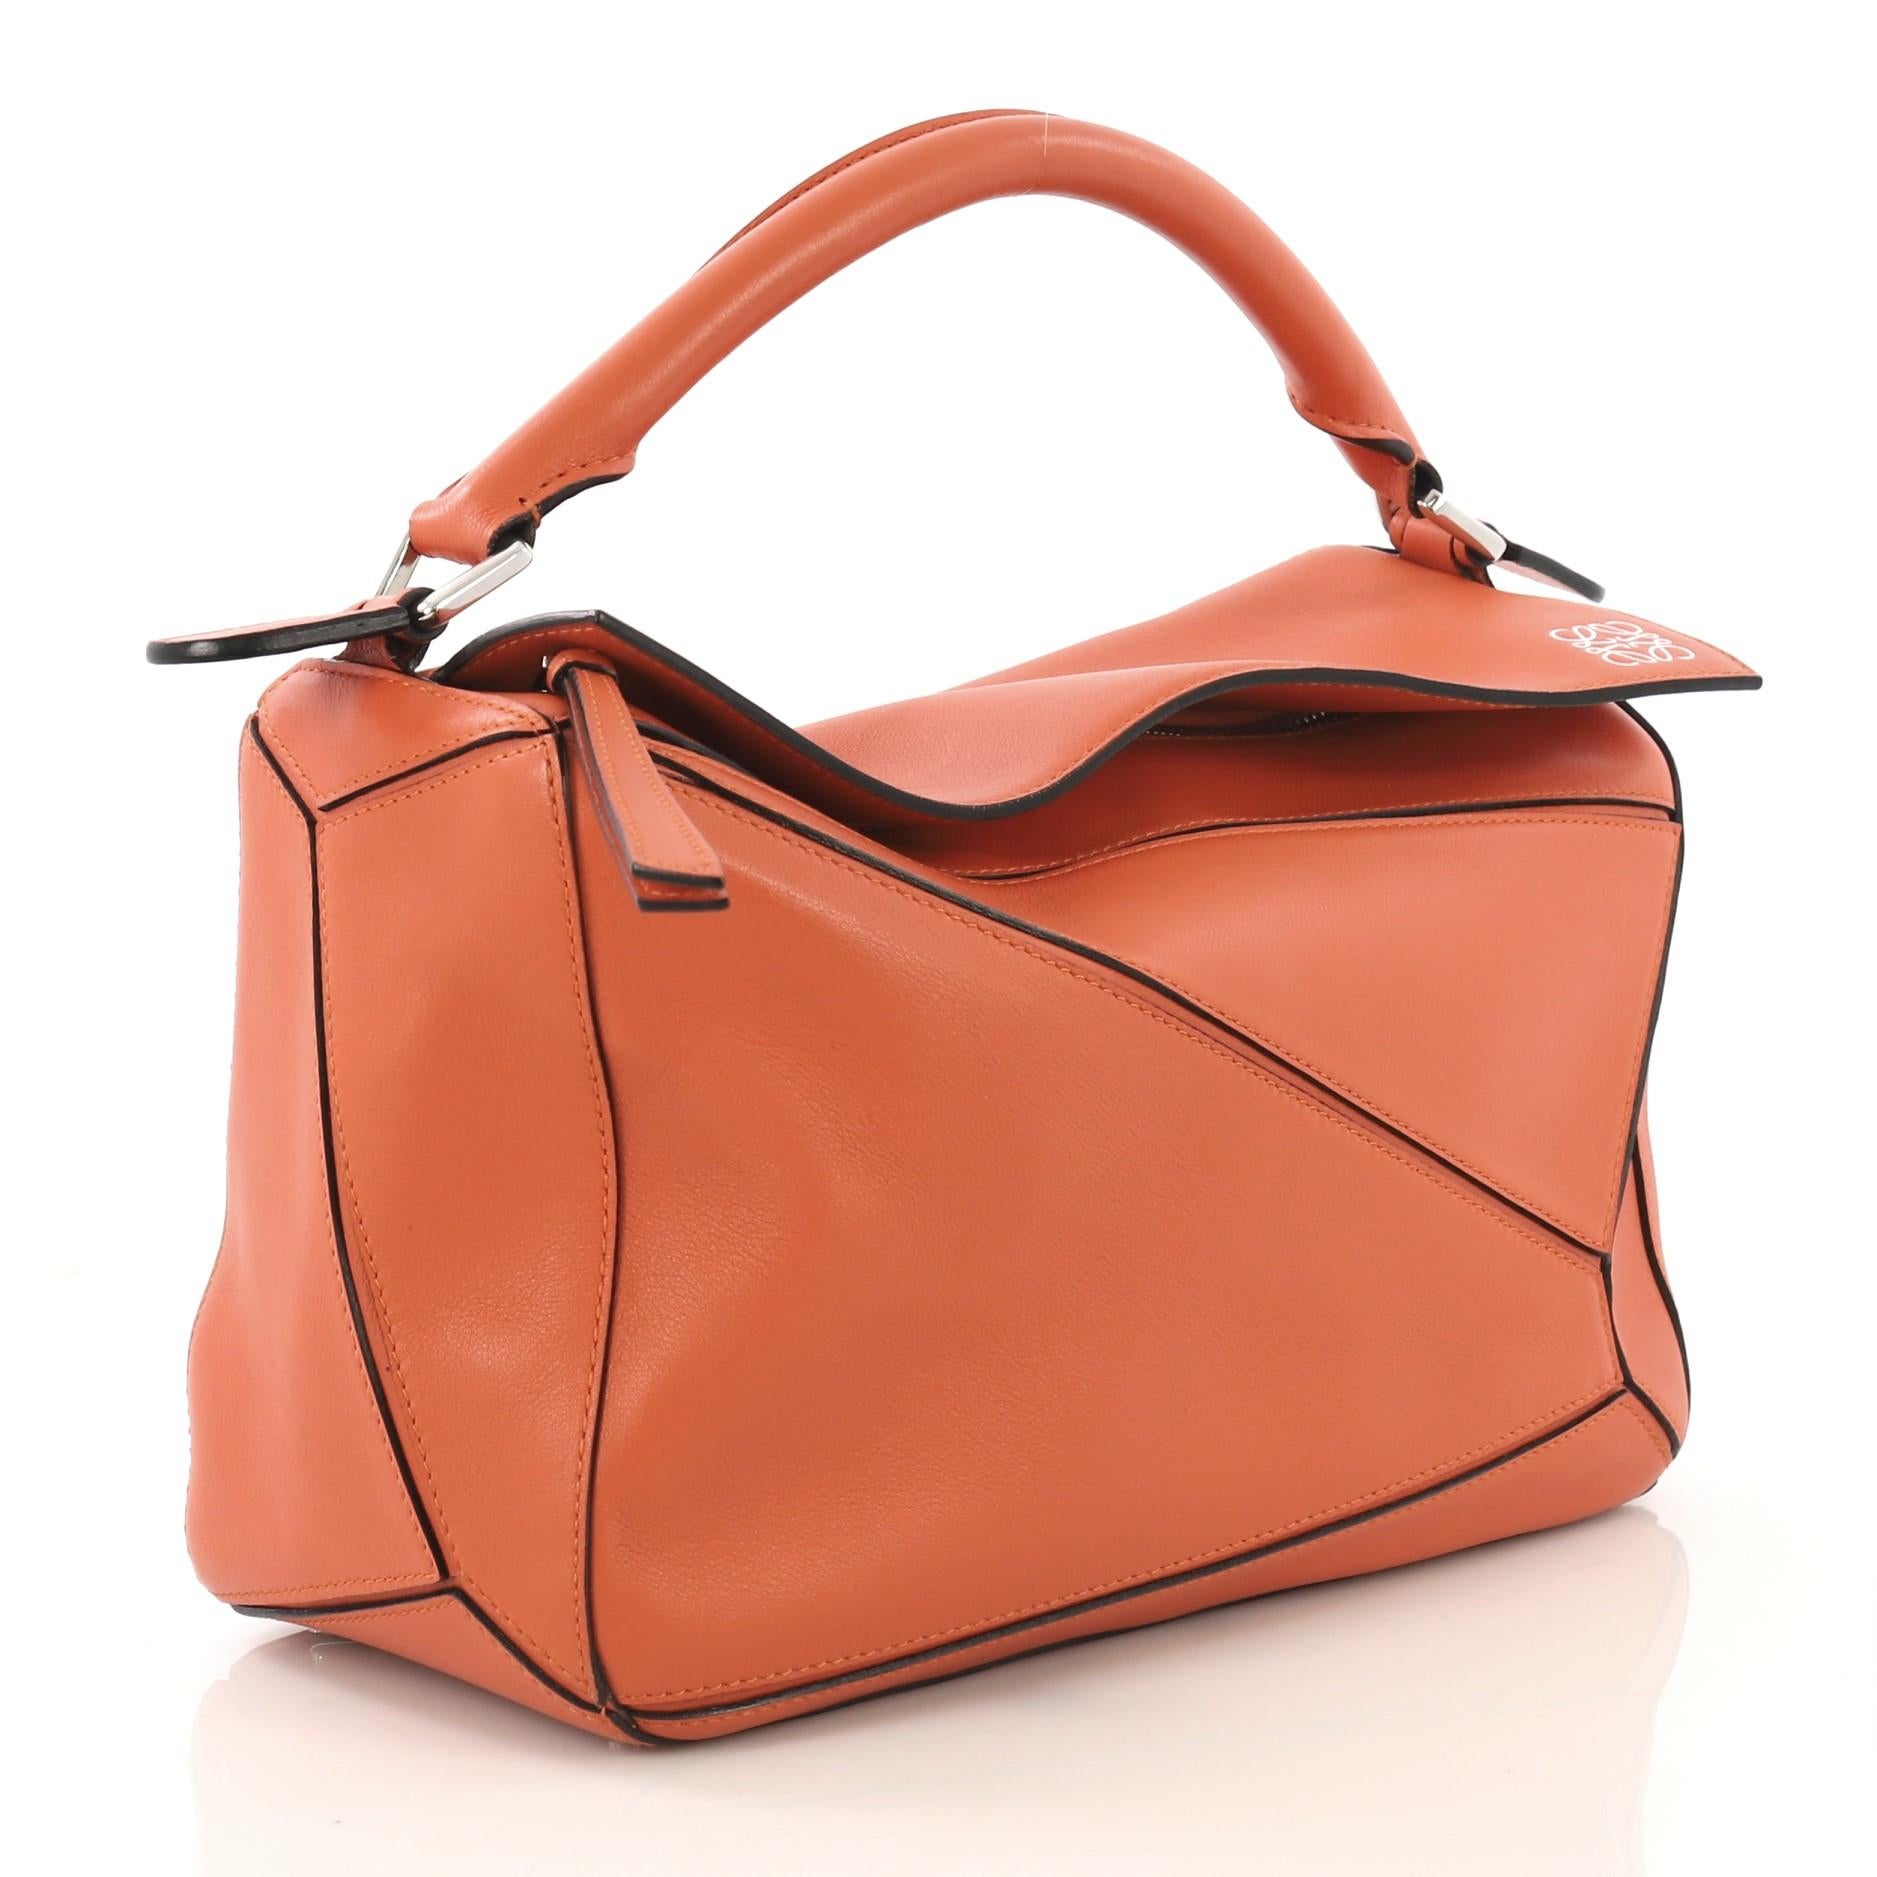 This Loewe Puzzle Bag Leather Medium, crafted in orange leather, features a leather top handle and silver-tone hardware. Its zip closure opens to a beige fabric interior with slip pockets. 

Estimated Retail Price: $2,450
Condition: Very good. Minor